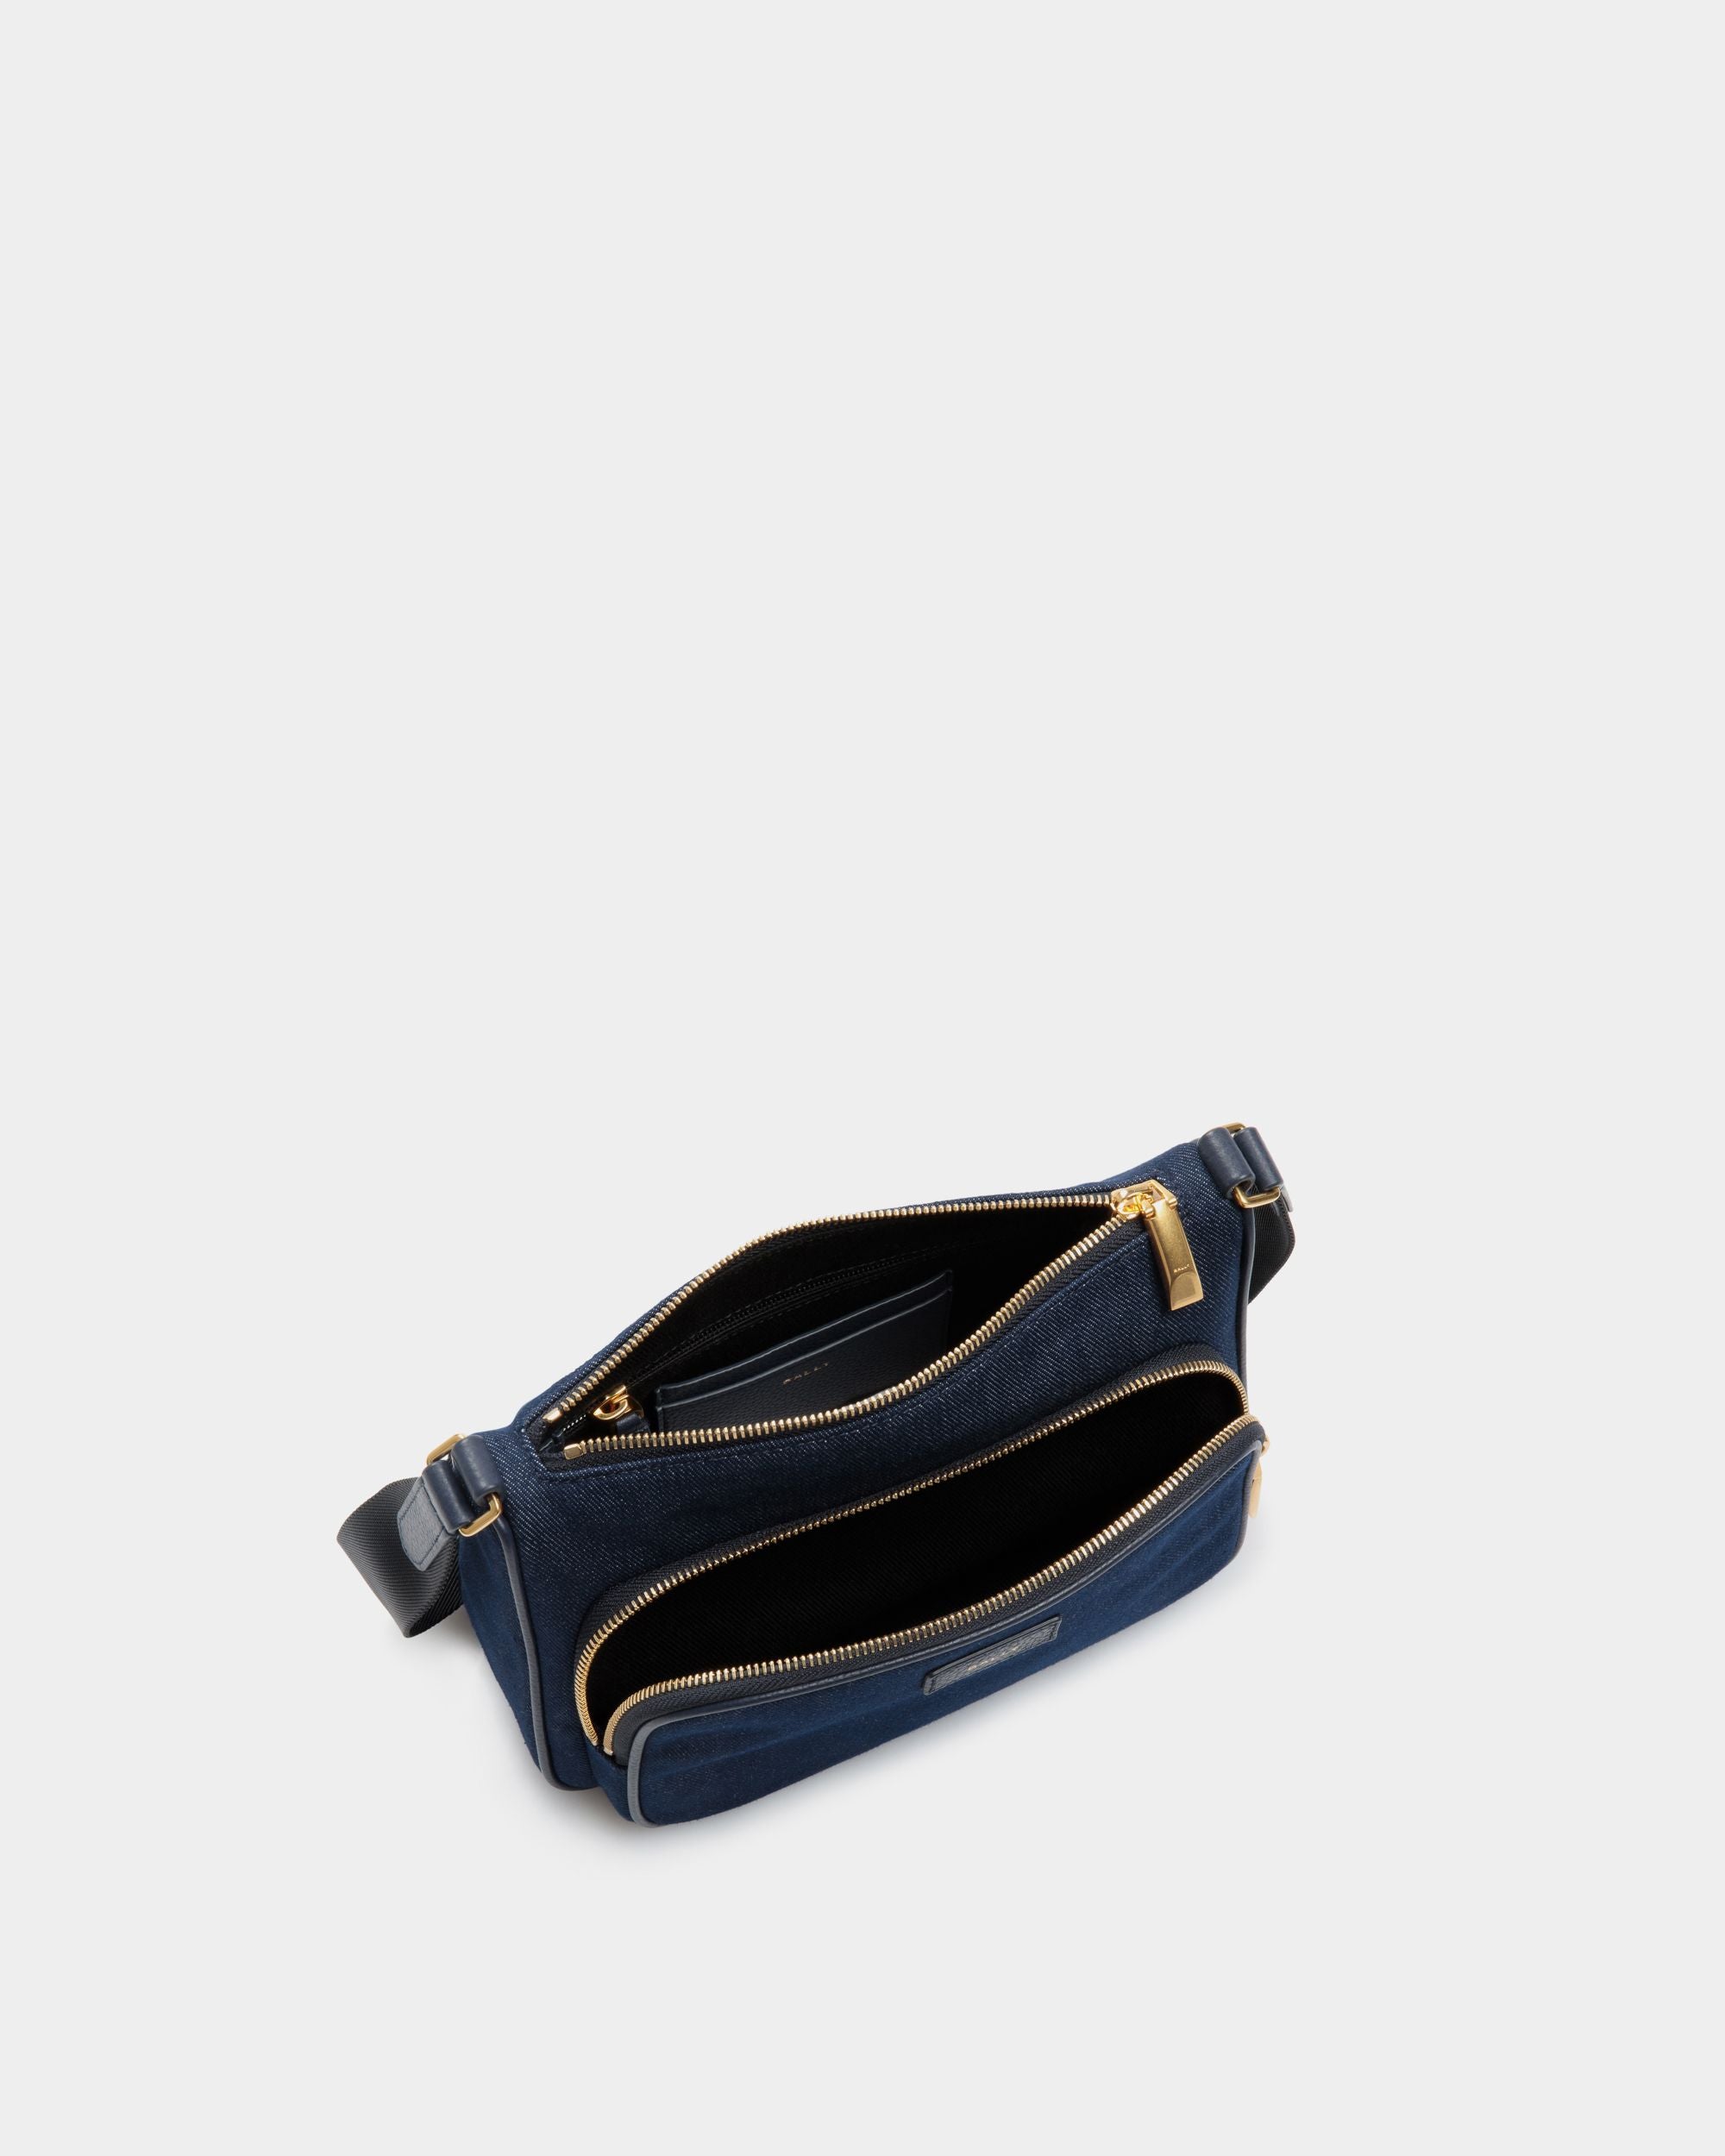 Bar | Men's Crossbody Bag in Blue Canvas And Leather | Bally | Still Life Open / Inside